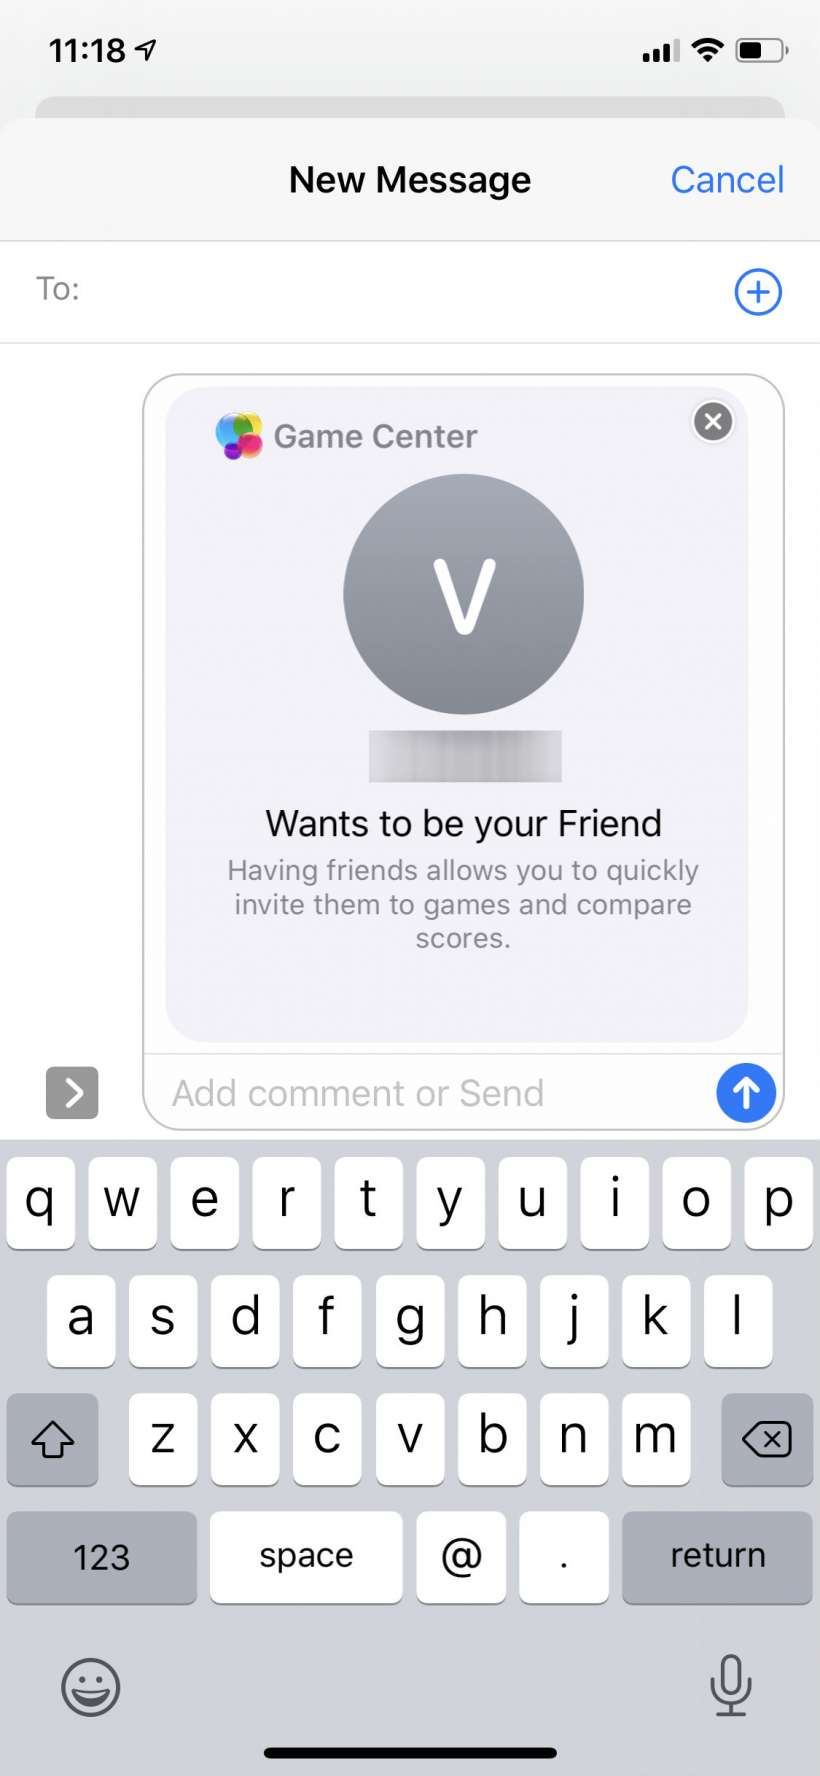 How to add friends in Game Center on iPhone and iPad.